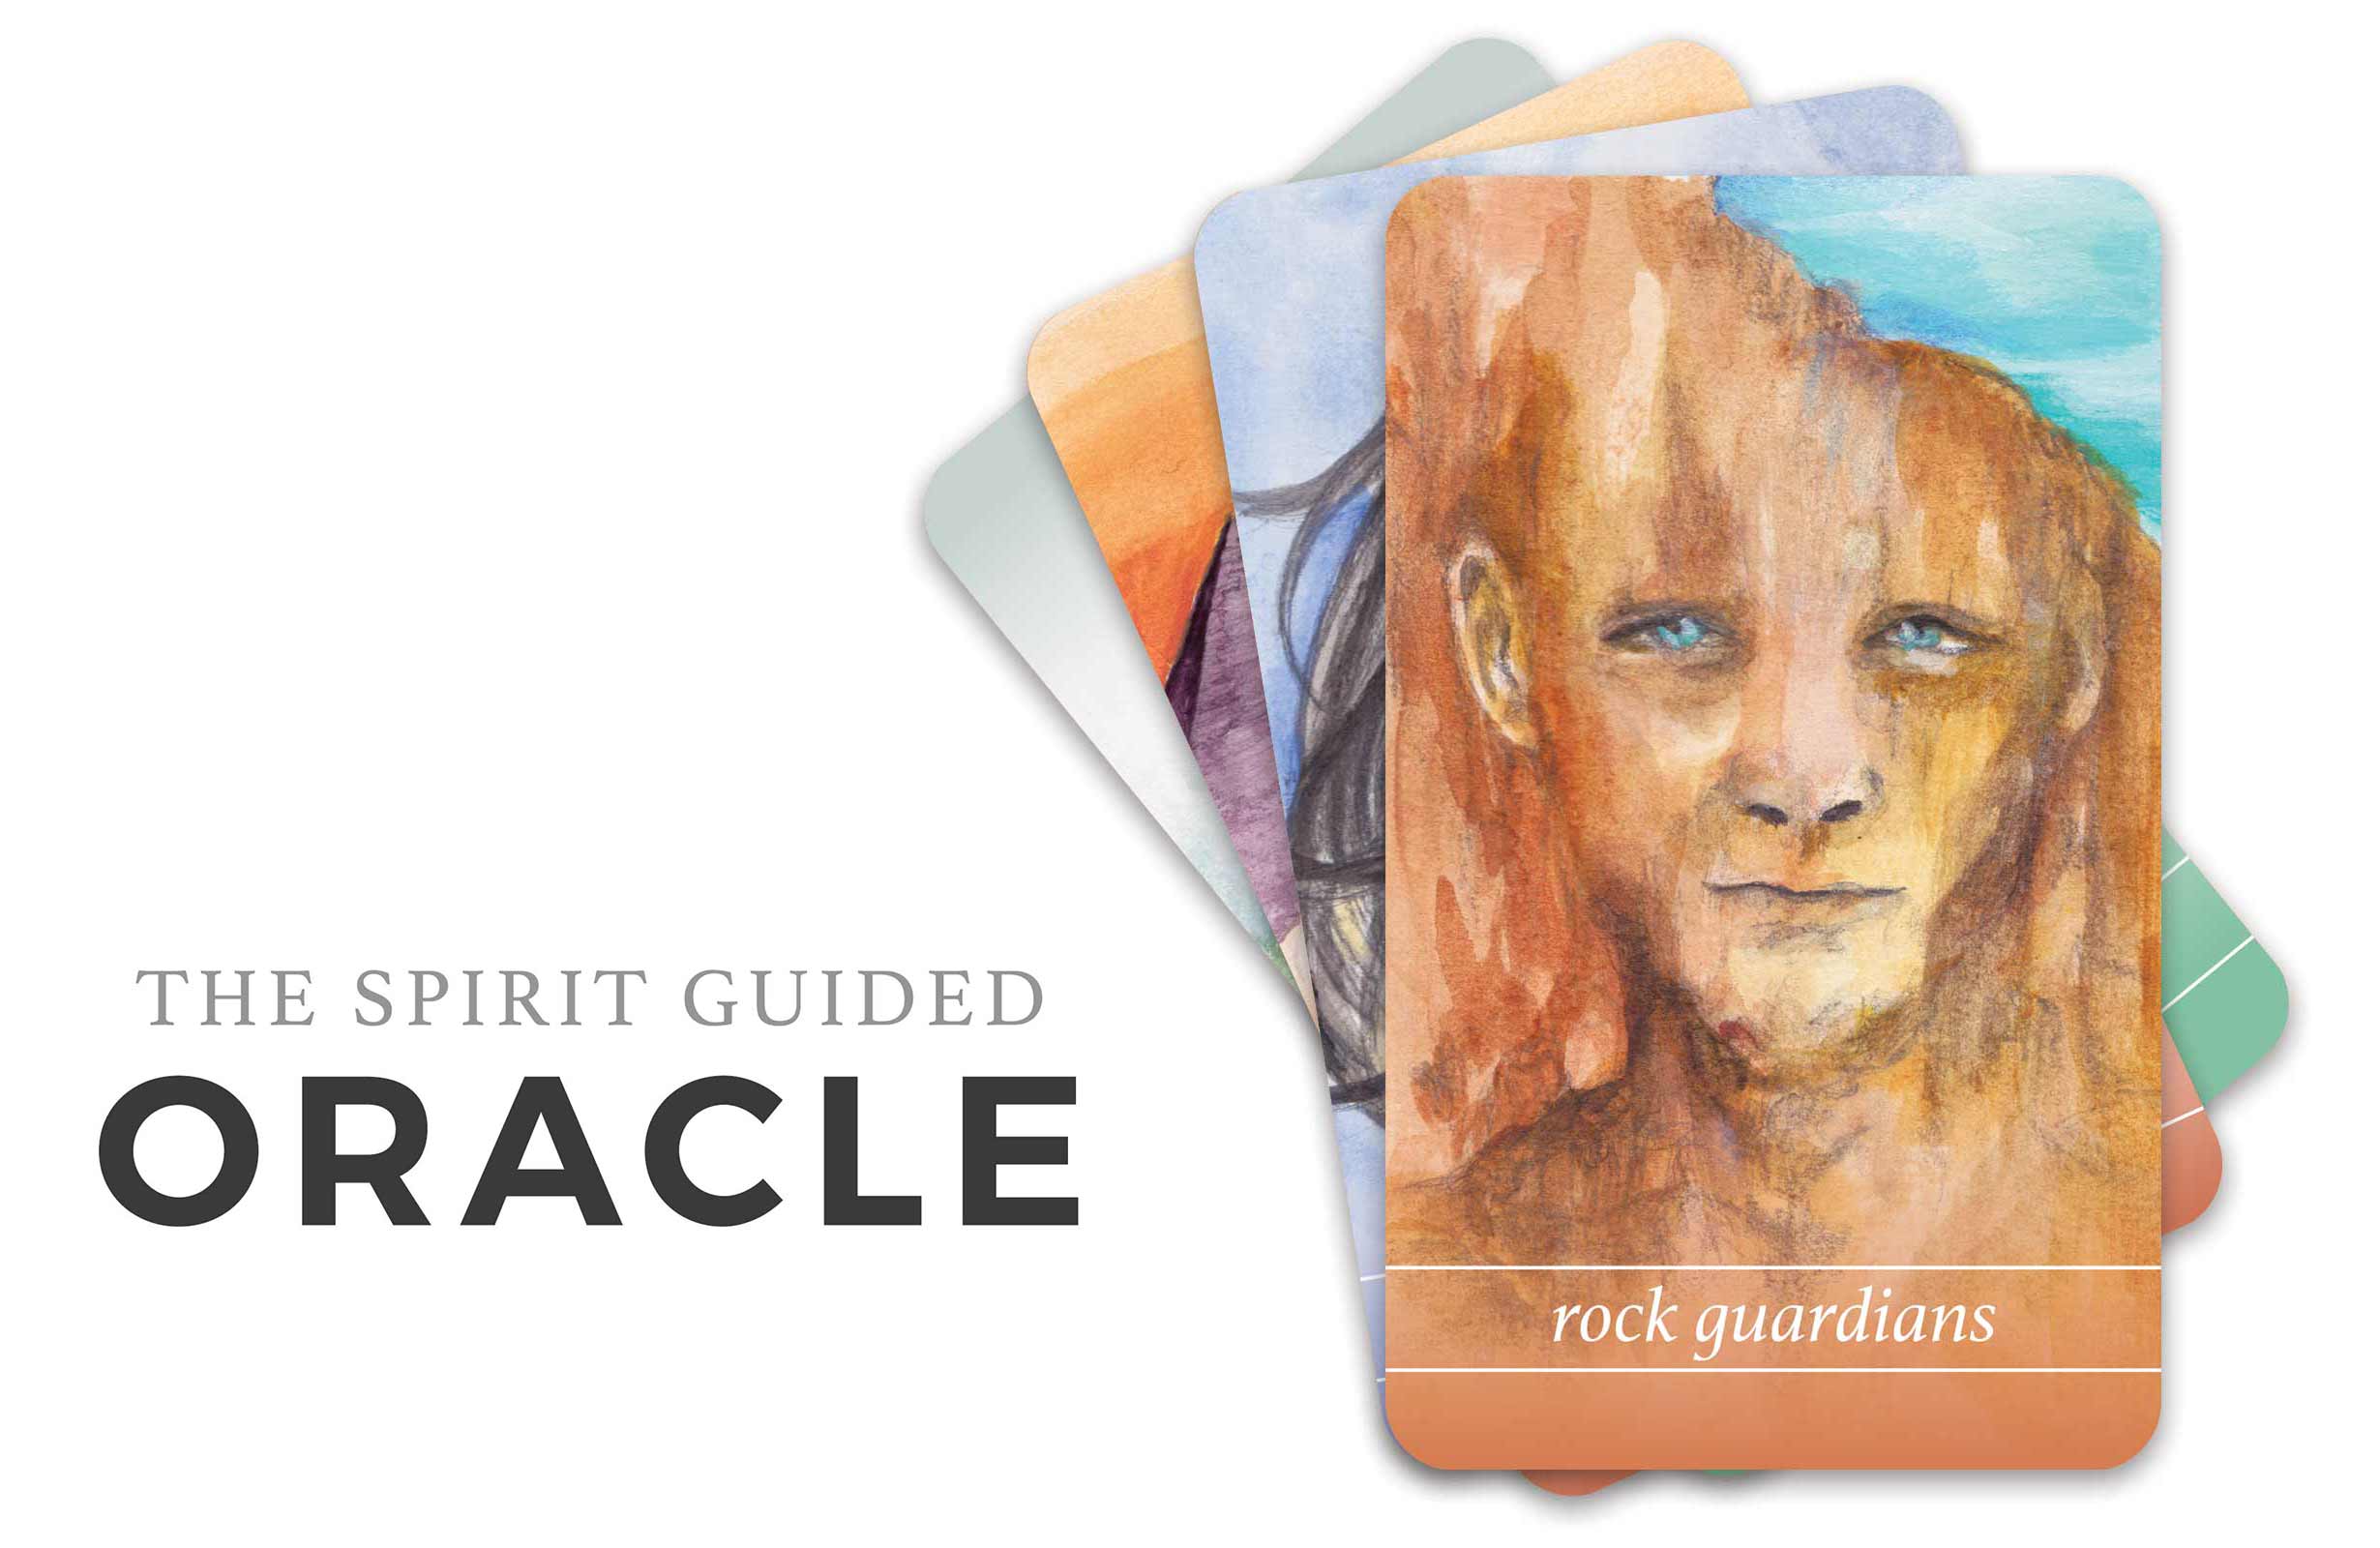 The Spirit Guided Oracle